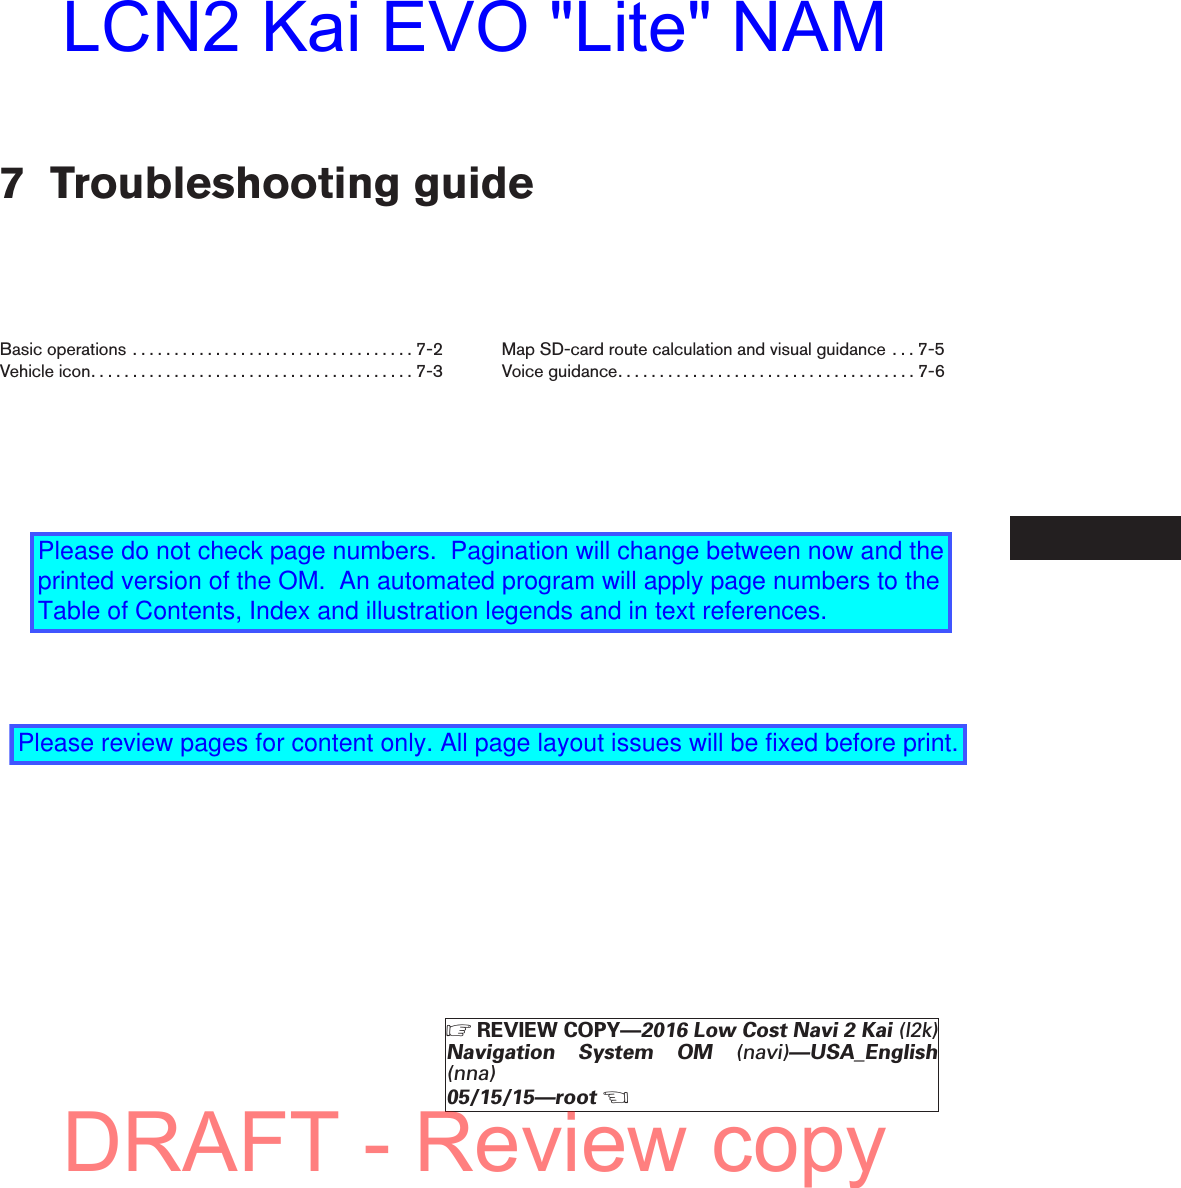 7 Troubleshooting guideBasicoperations ..................................7-2Vehicleicon.......................................7-3Map SD-card route calculation and visual guidance . . . 7-5Voiceguidance....................................7-6ZREVIEW COPY—2016 Low Cost Navi 2 Kai (l2k)Navigation System OM (navi)—USA_English(nna)05/15/15—rootXDRAFT - Review copyLCN2 Kai EVO &quot;Lite&quot; NAMPlease do not check page numbers.  Pagination will change between now and the printed version of the OM.  An automated program will apply page numbers to the Table of Contents, Index and illustration legends and in text references.Please review pages for content only. All page layout issues will be fixed before print.